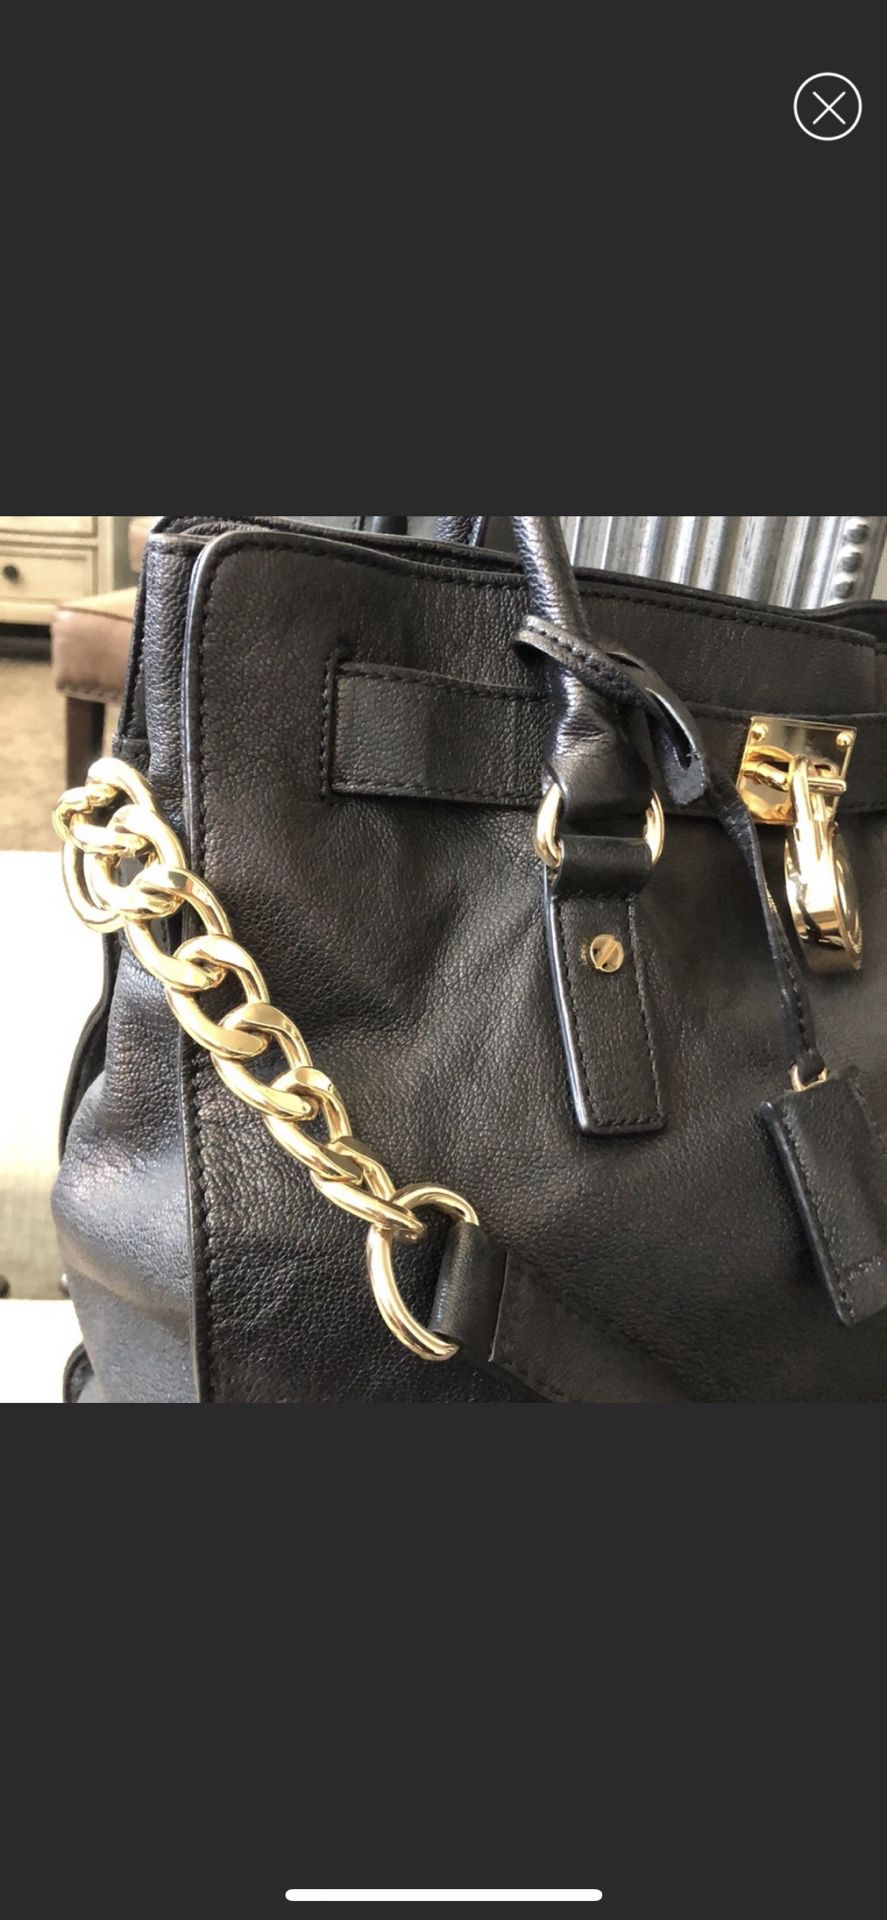 Authentic Leather Michael Kors Purse for Sale in Norris City, IL - OfferUp